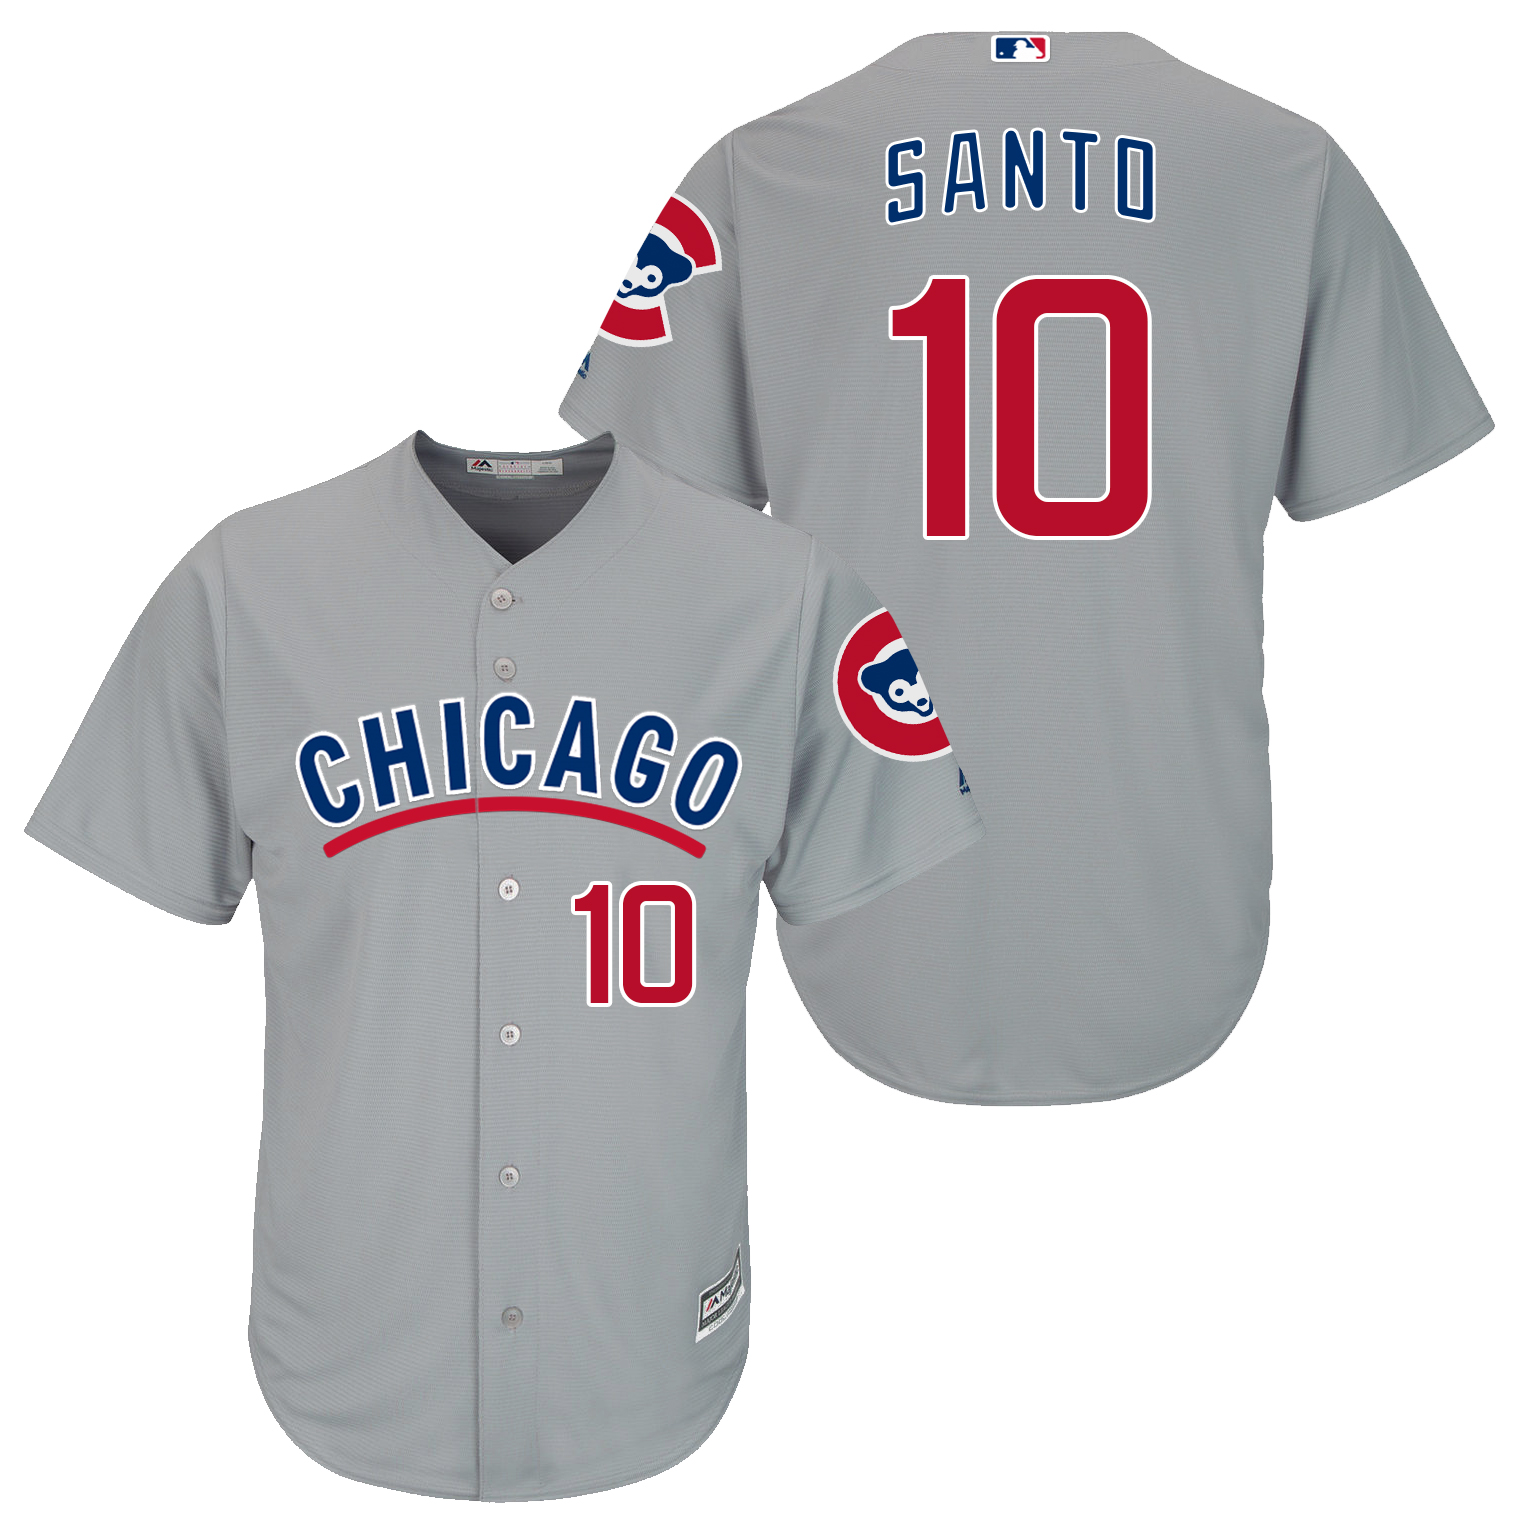 Cubs 10 Ron Santo Grey New Cool Base Jersey